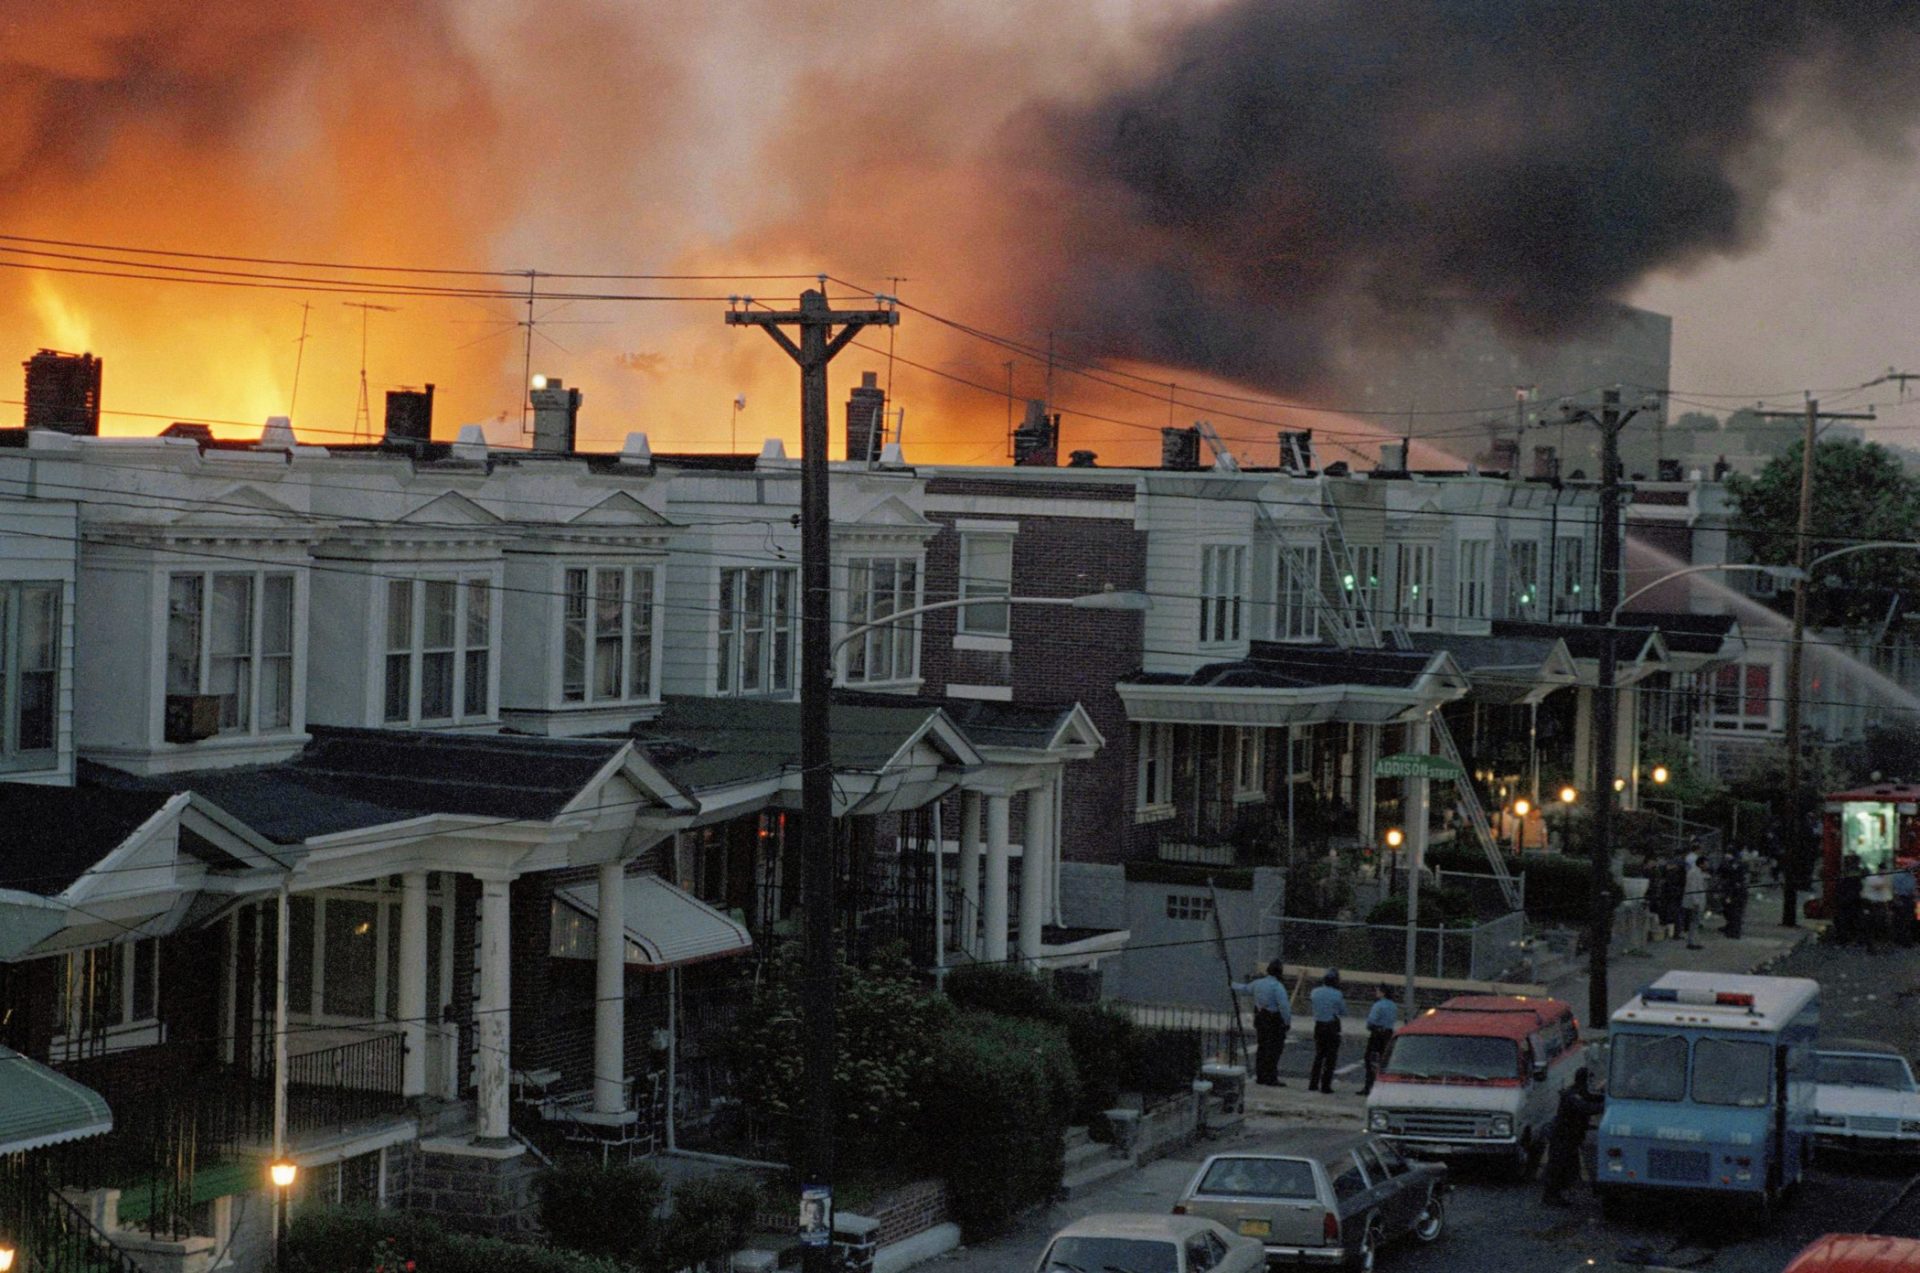 FILE PHOTO: In this file photo, scores of West Philly rowhouses burn in a fire after police dropped a bomb on the MOVE headquarters on May 13, 1985. Eleven people were killed, including five children.